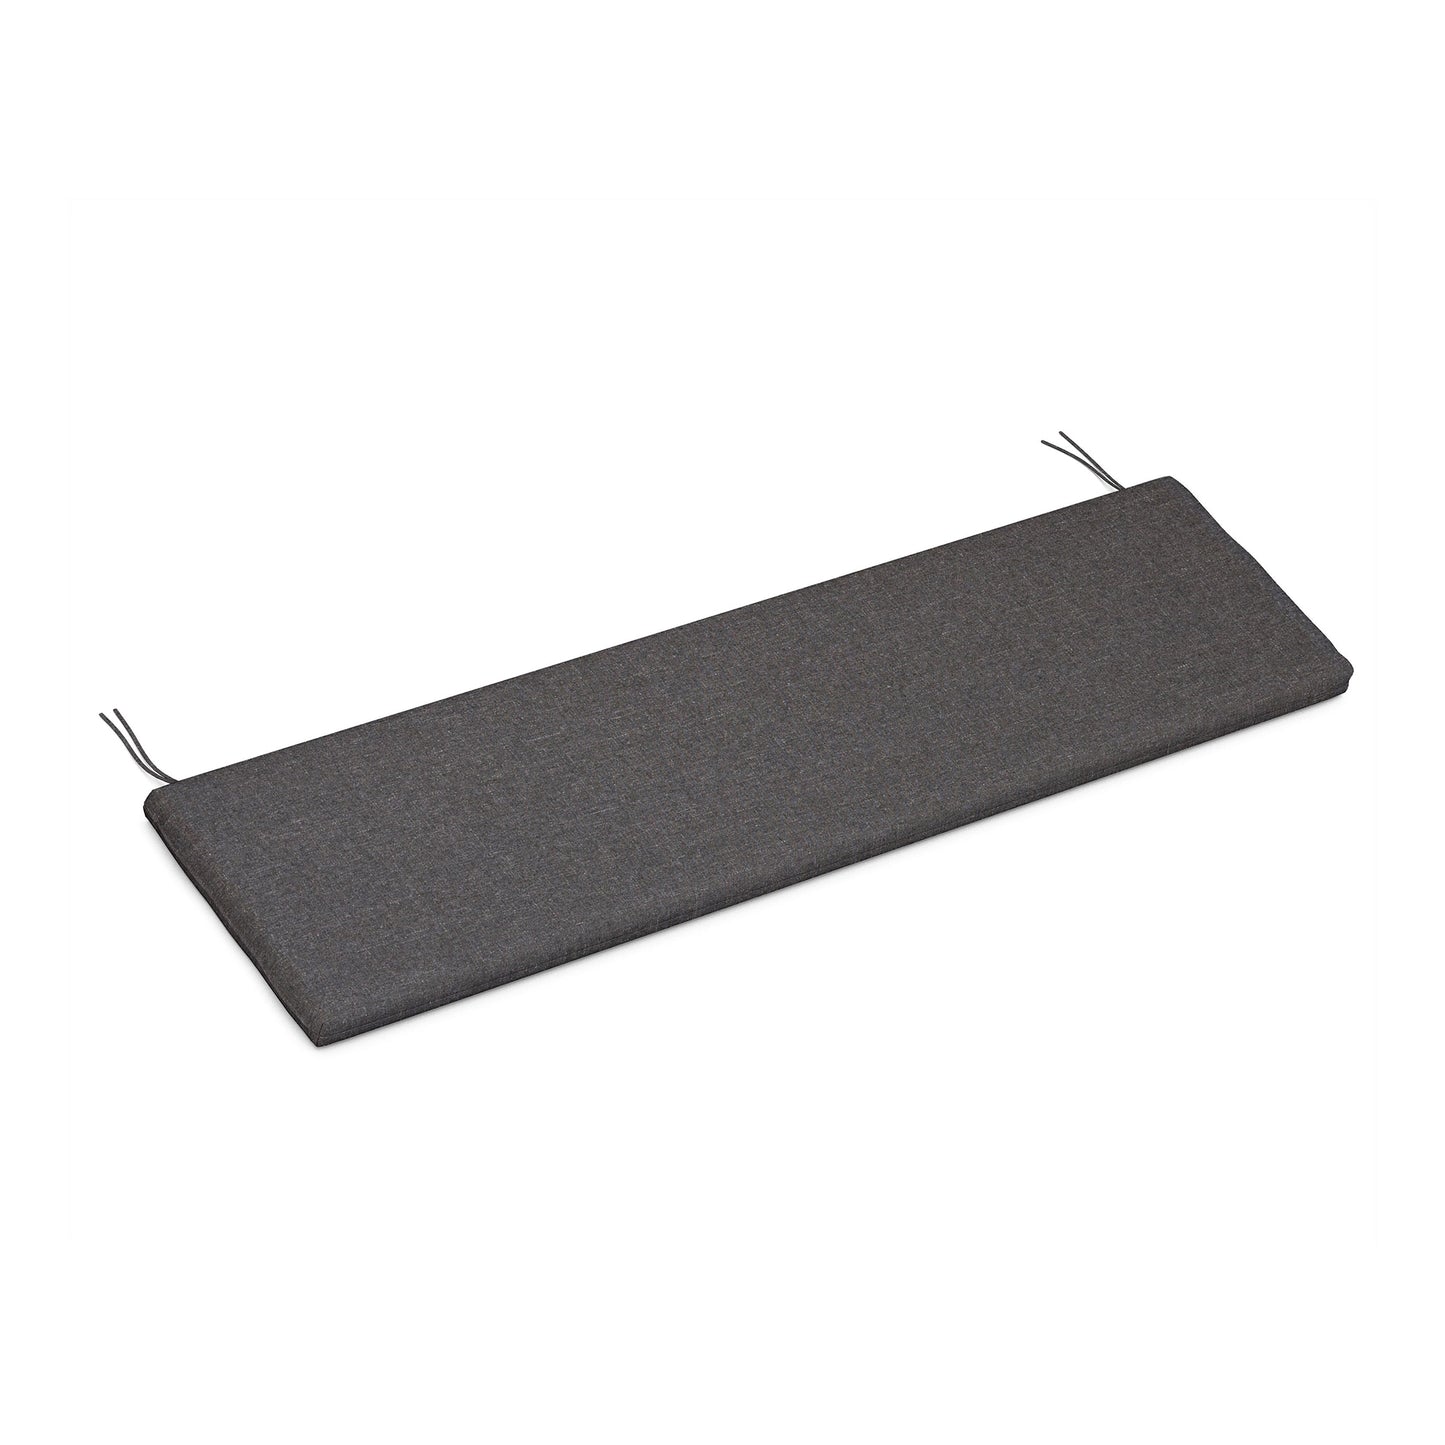 A rectangular gray POLYWOOD® XPWS0061 - Seat Cushion with two ties on each end, photographed on a white background.